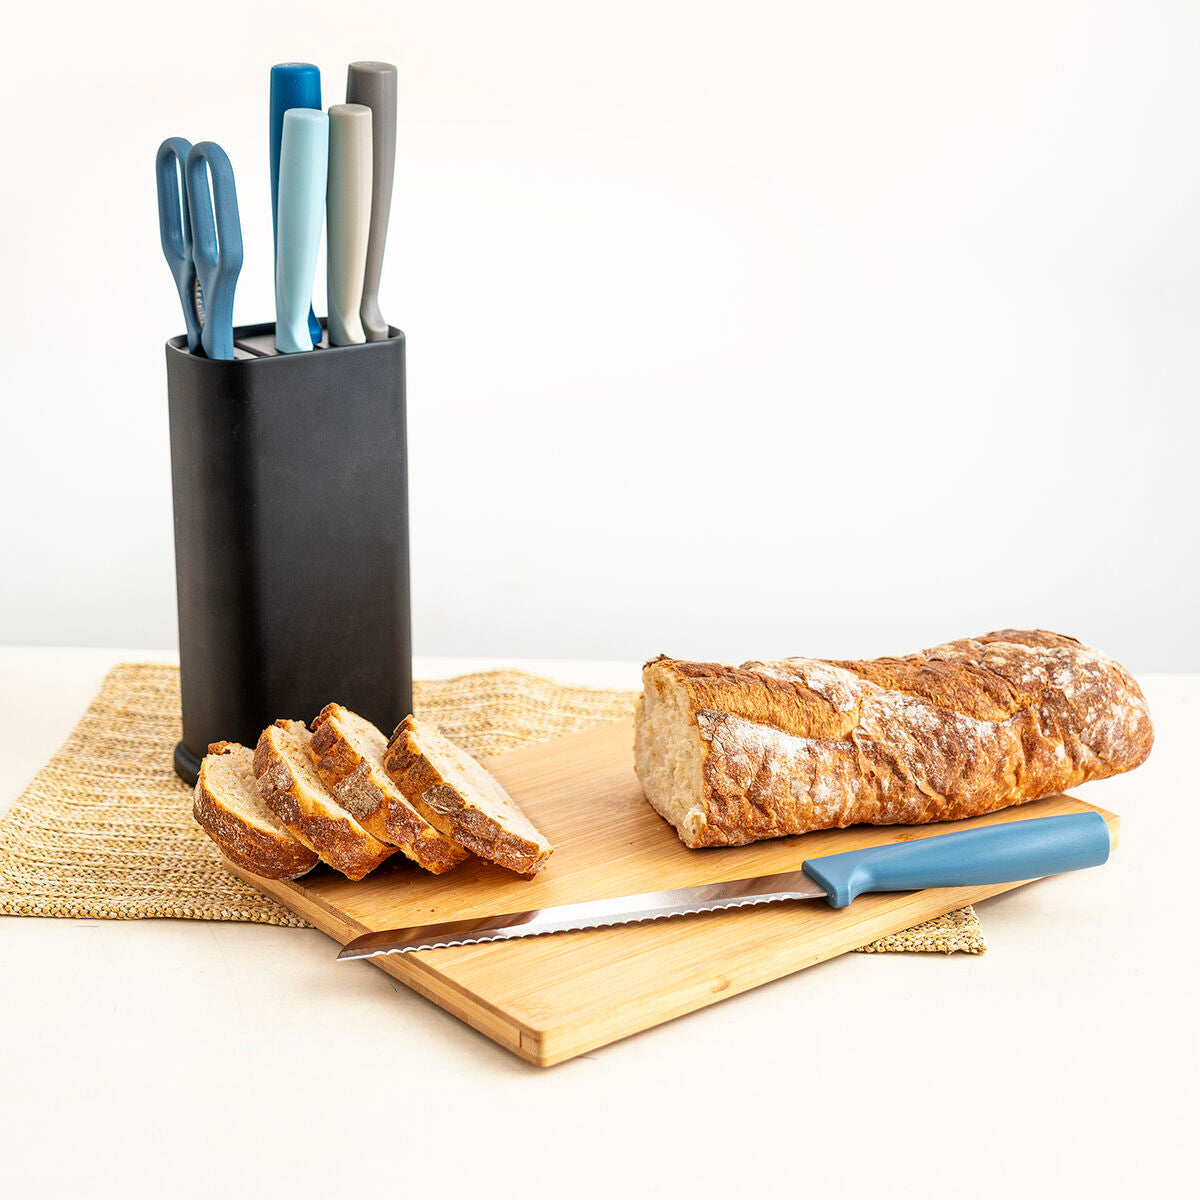 Set of Kitchen Knives and Stand Quid Ozon 21 x 13 x 8 cm 7 Pieces